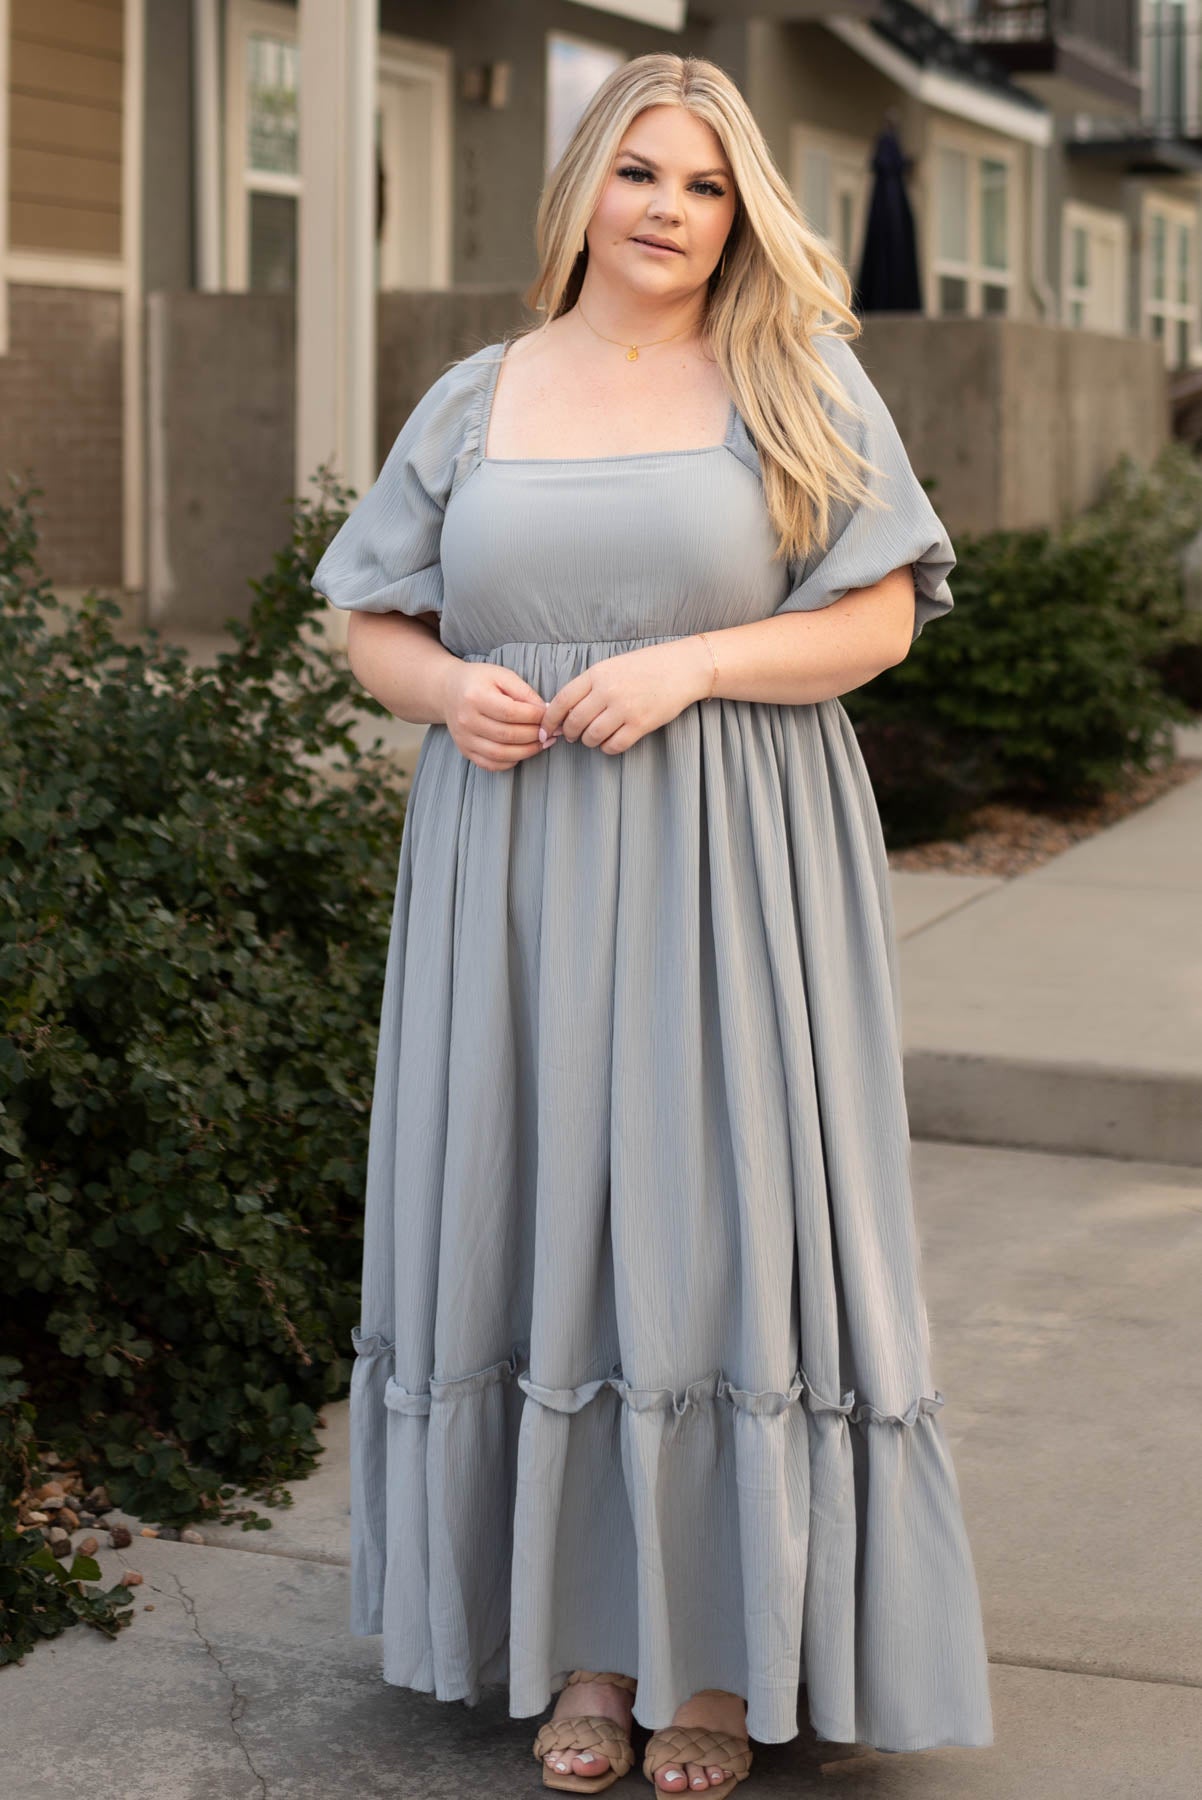 Short sleeve plus size slate grey dress with a square neck